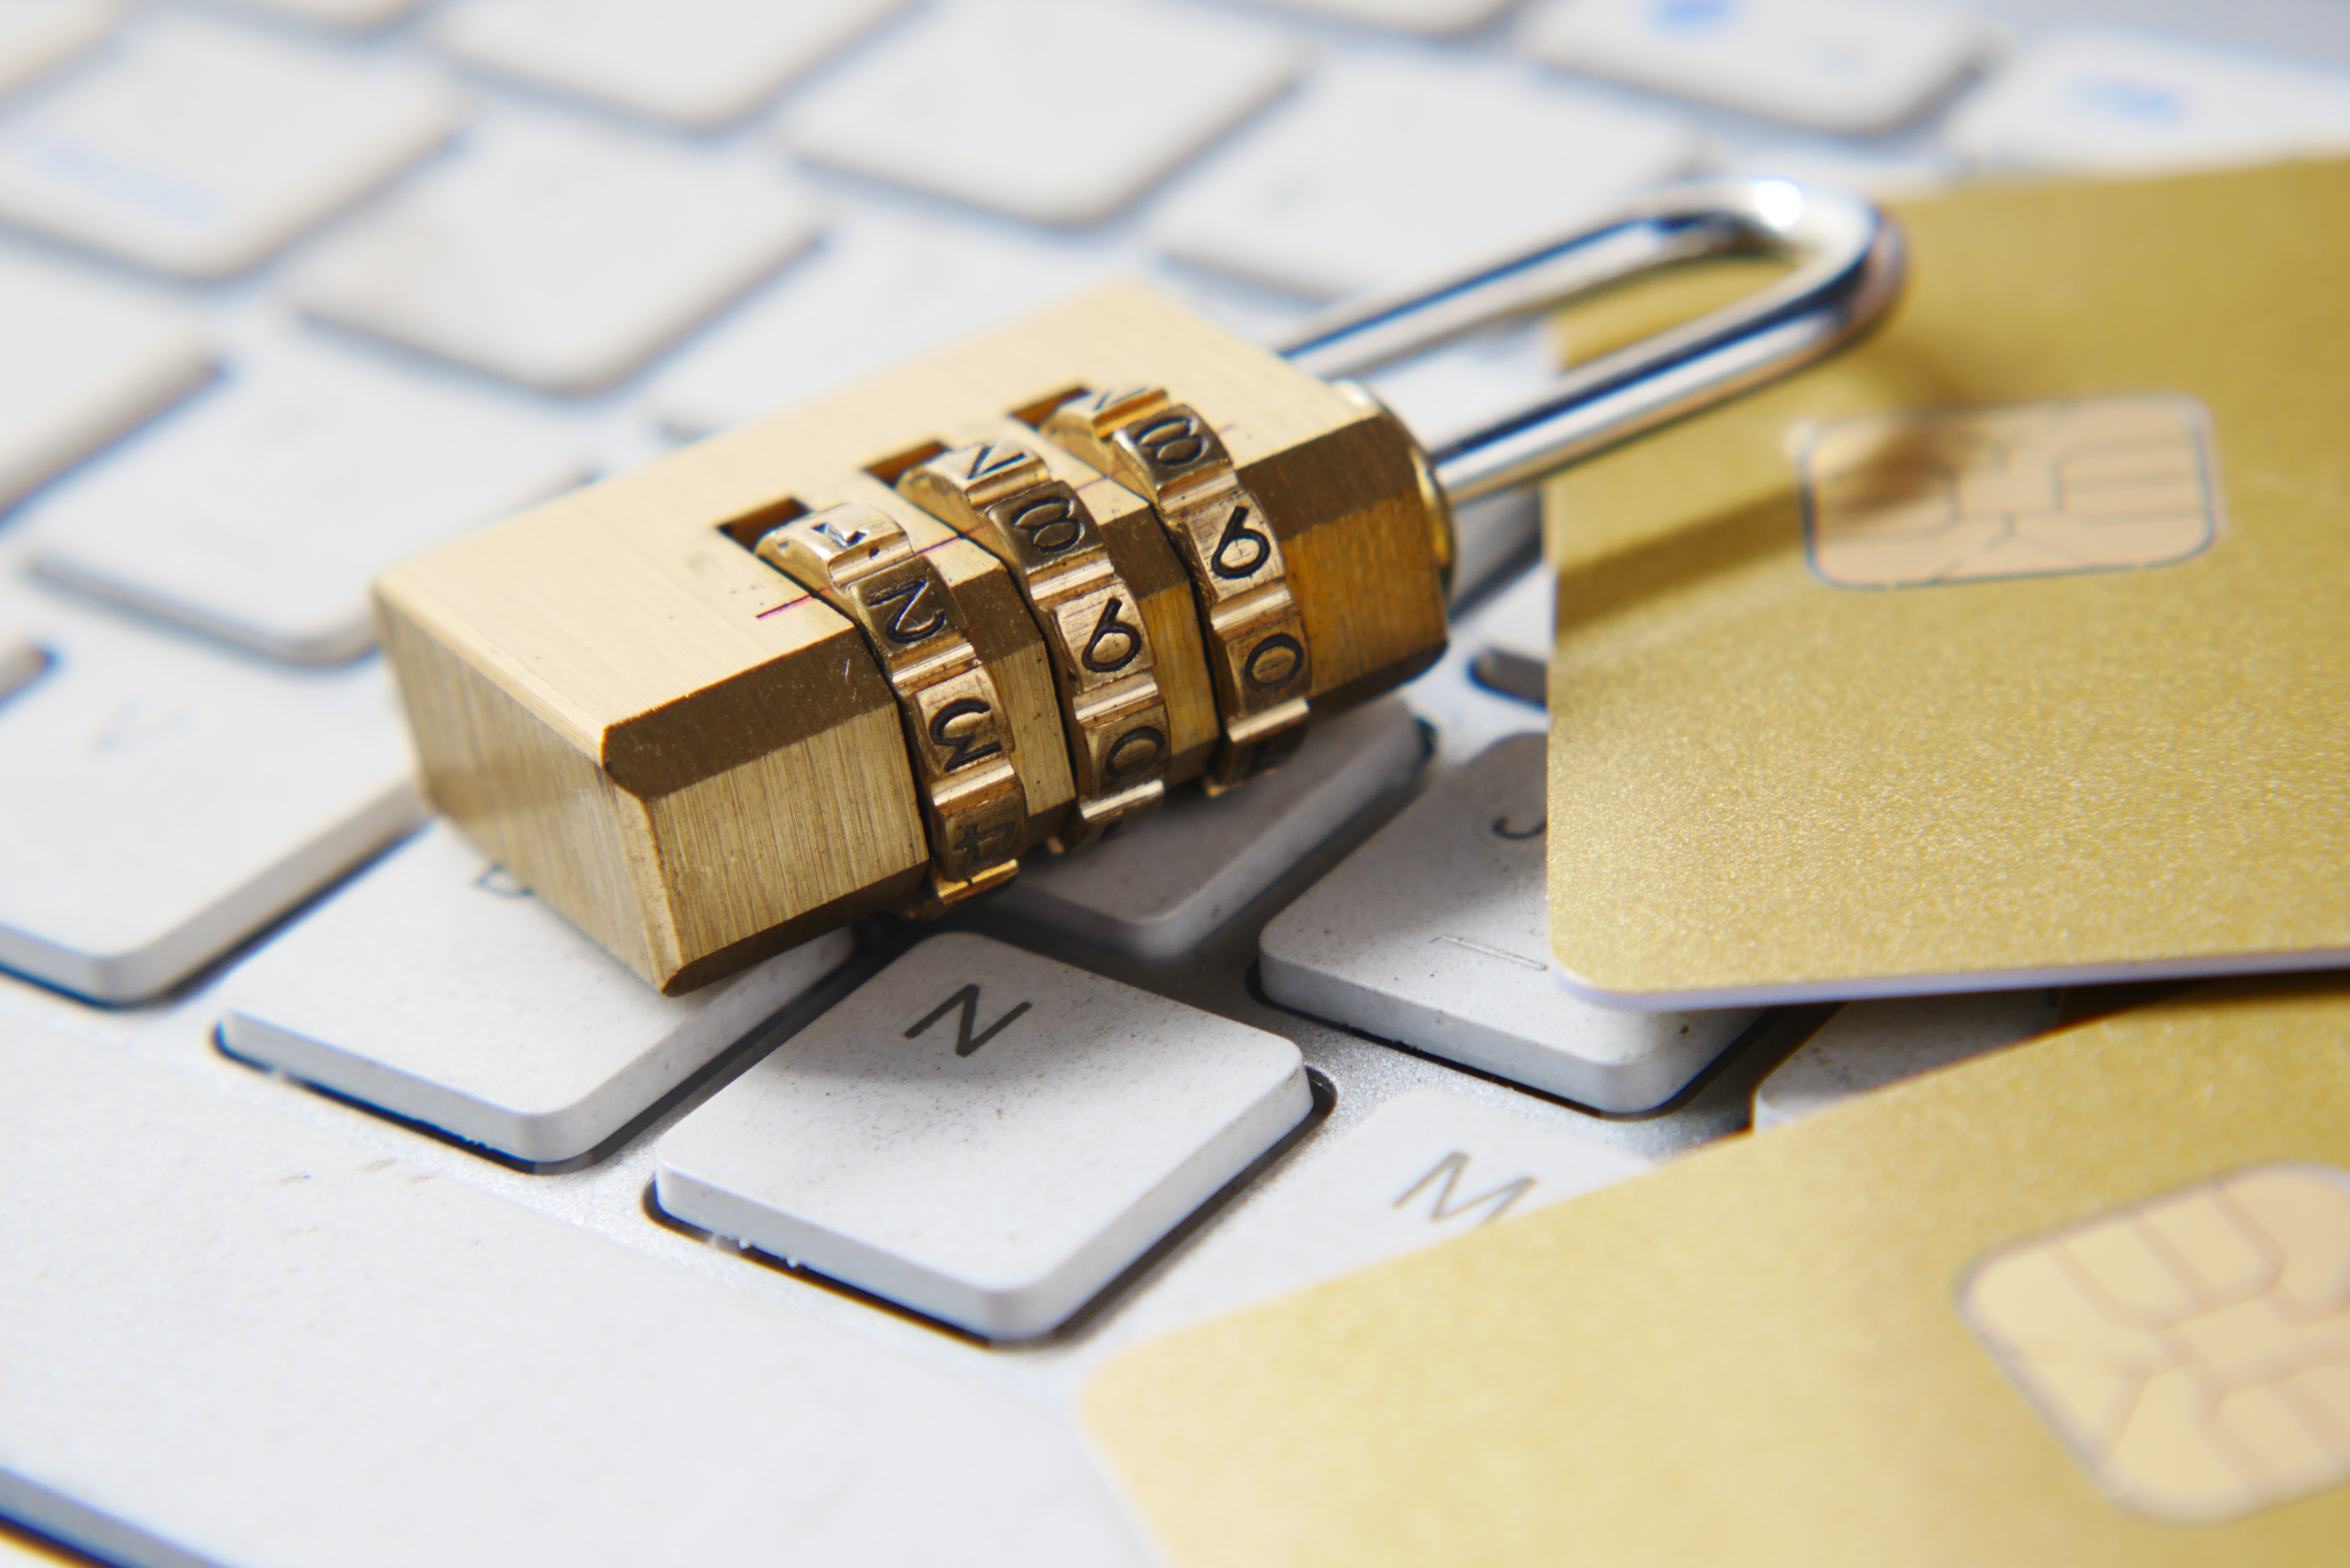 Image of a golden padlock sitting on top of a keyboard.